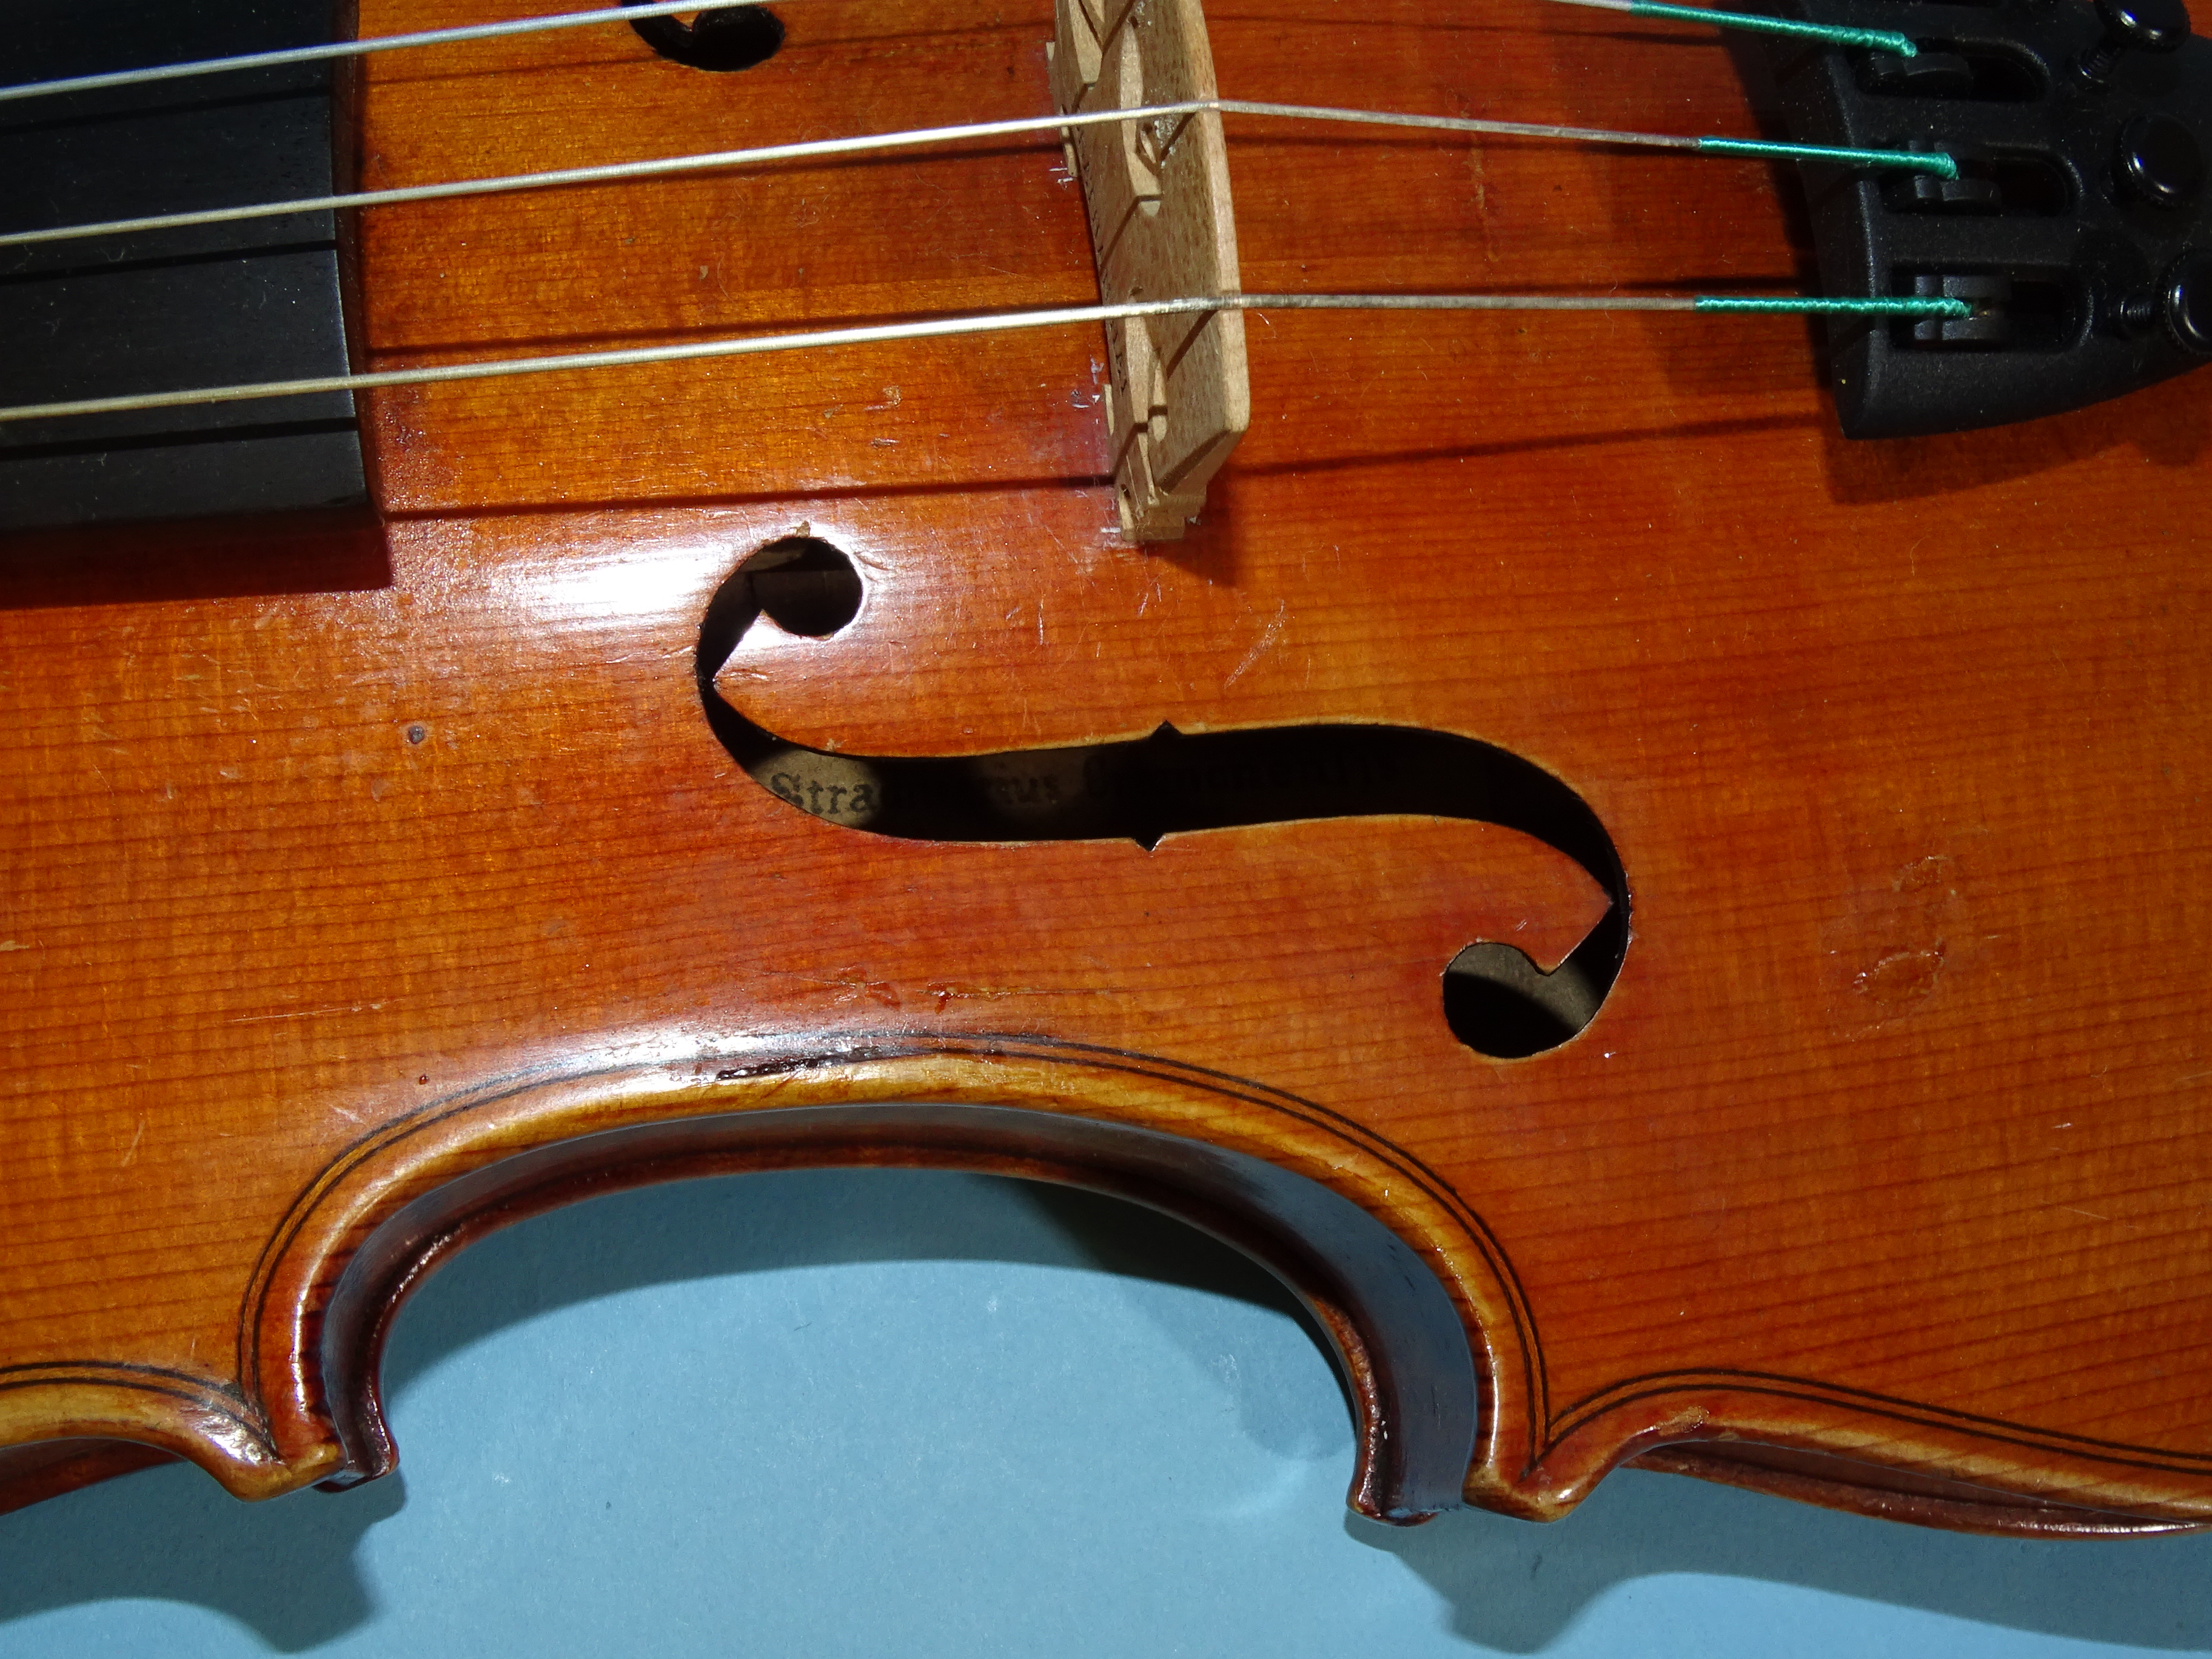 A 20th century ¾-size violin Stradivarius label, with bow, in case. - Image 5 of 8